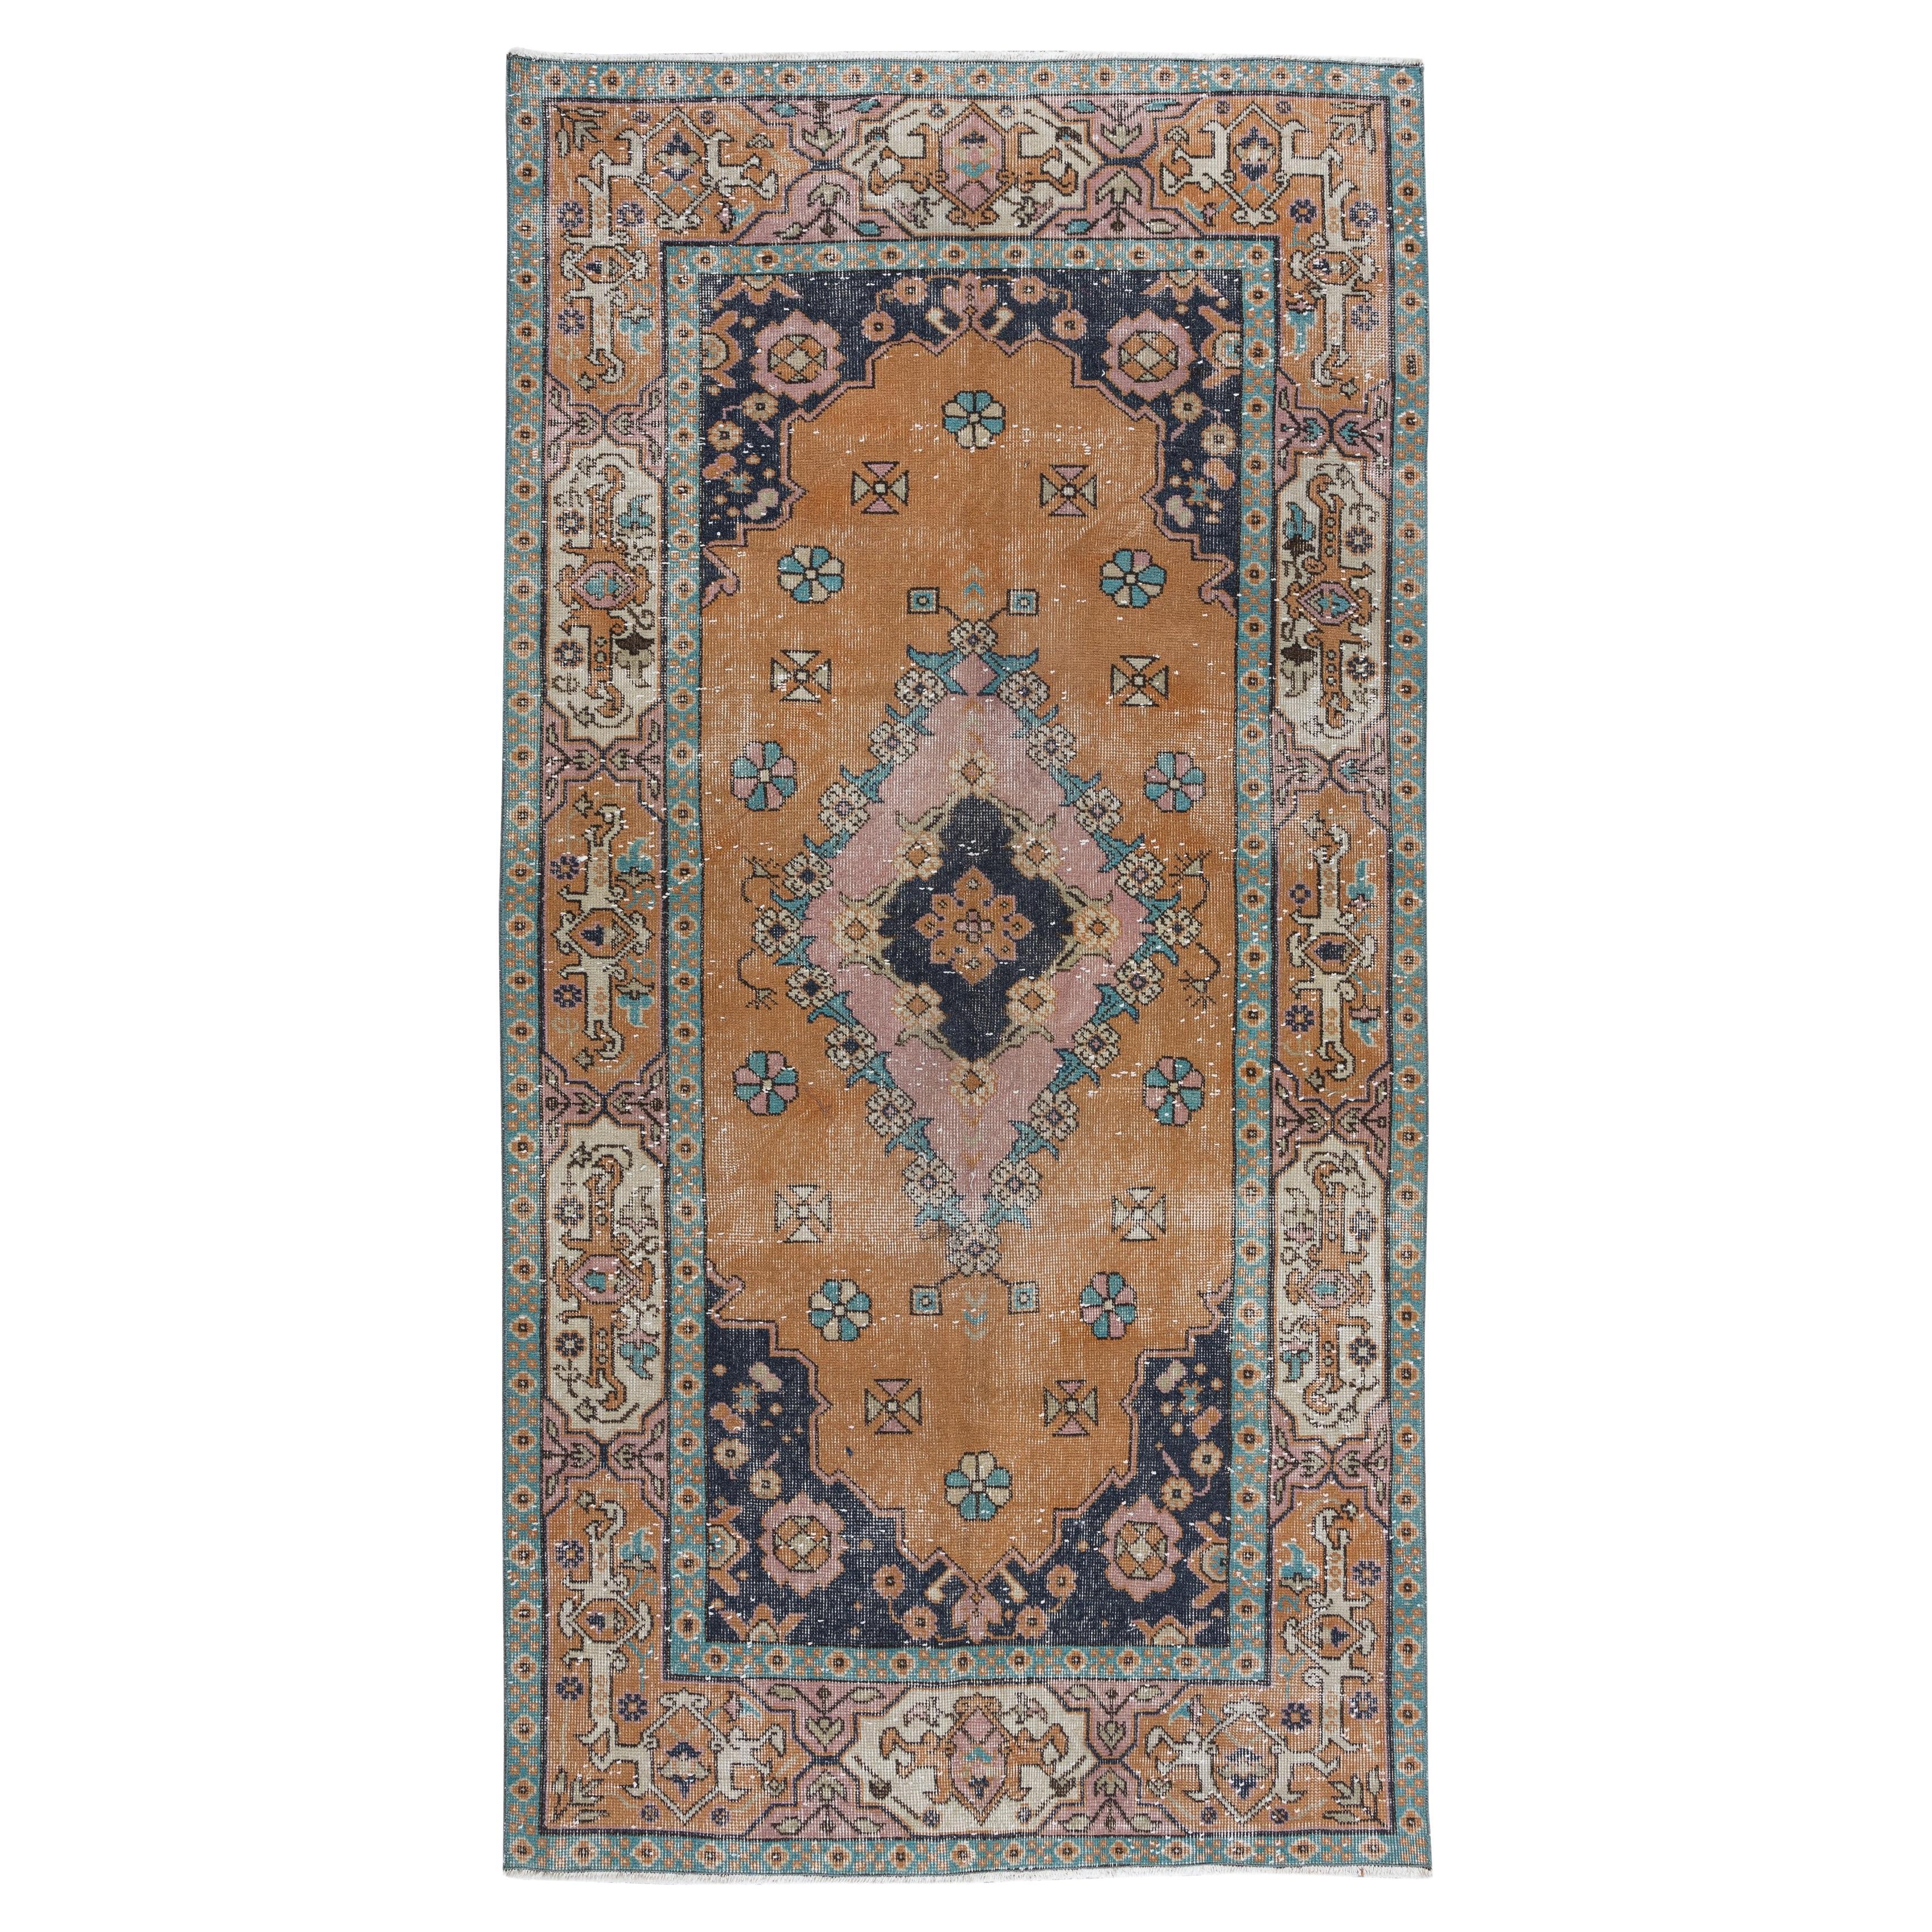 4.2x7.9 Ft Vintage Hand Knotted Rug, One-of-a-Kind Central Anatolian Carpet For Sale